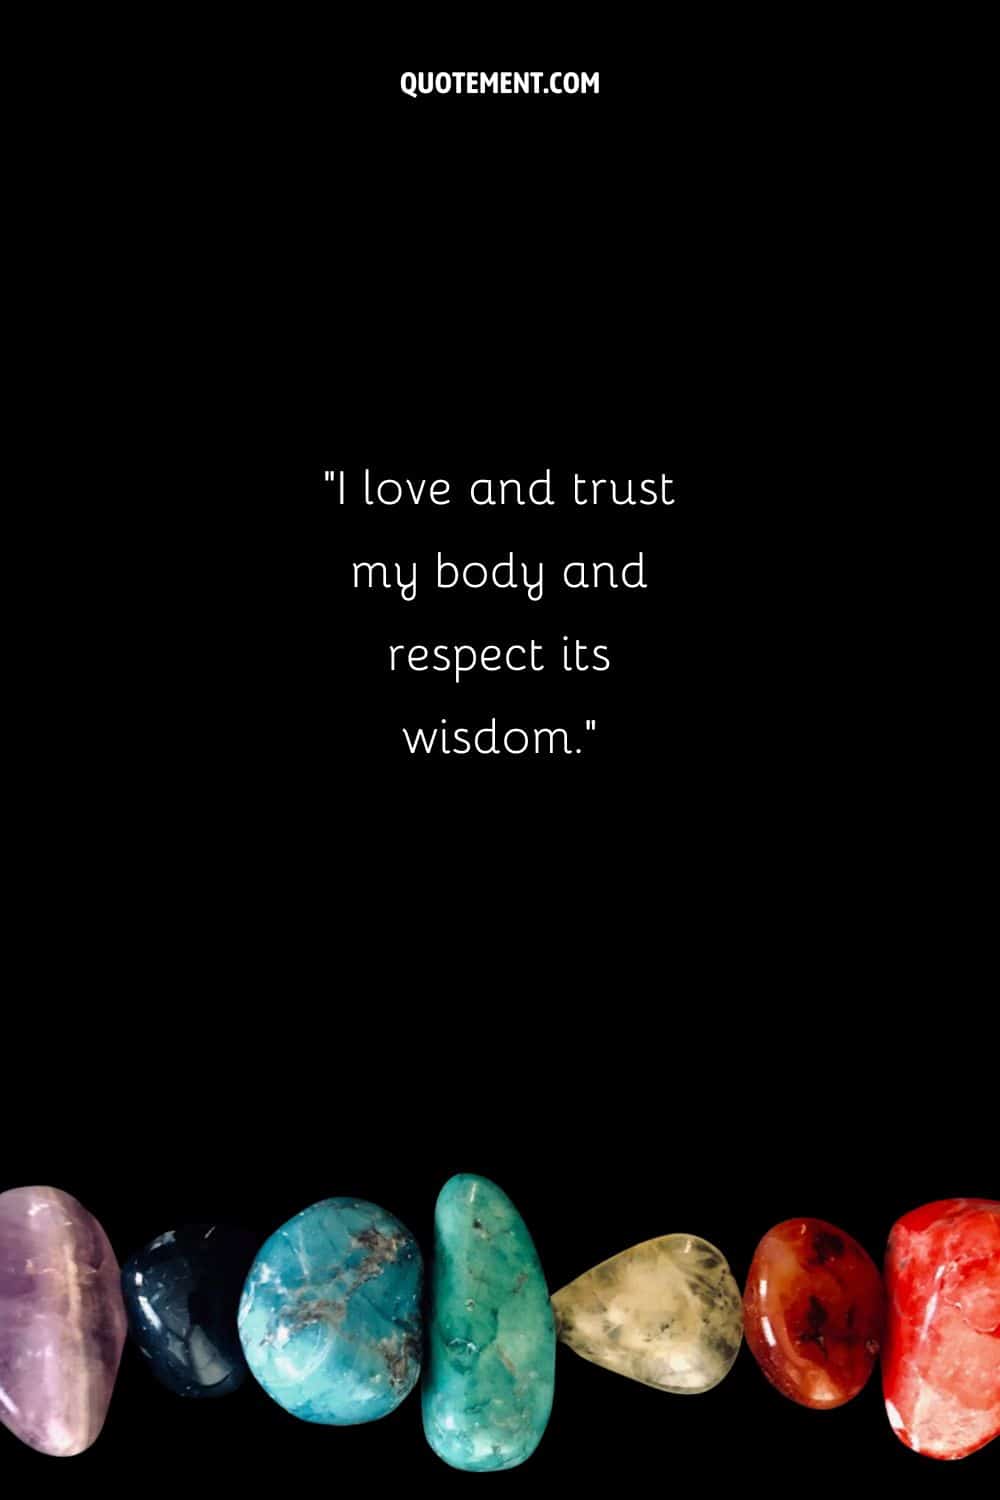 Affirmation for healing of the root chakra represented by the chakra stones under it
